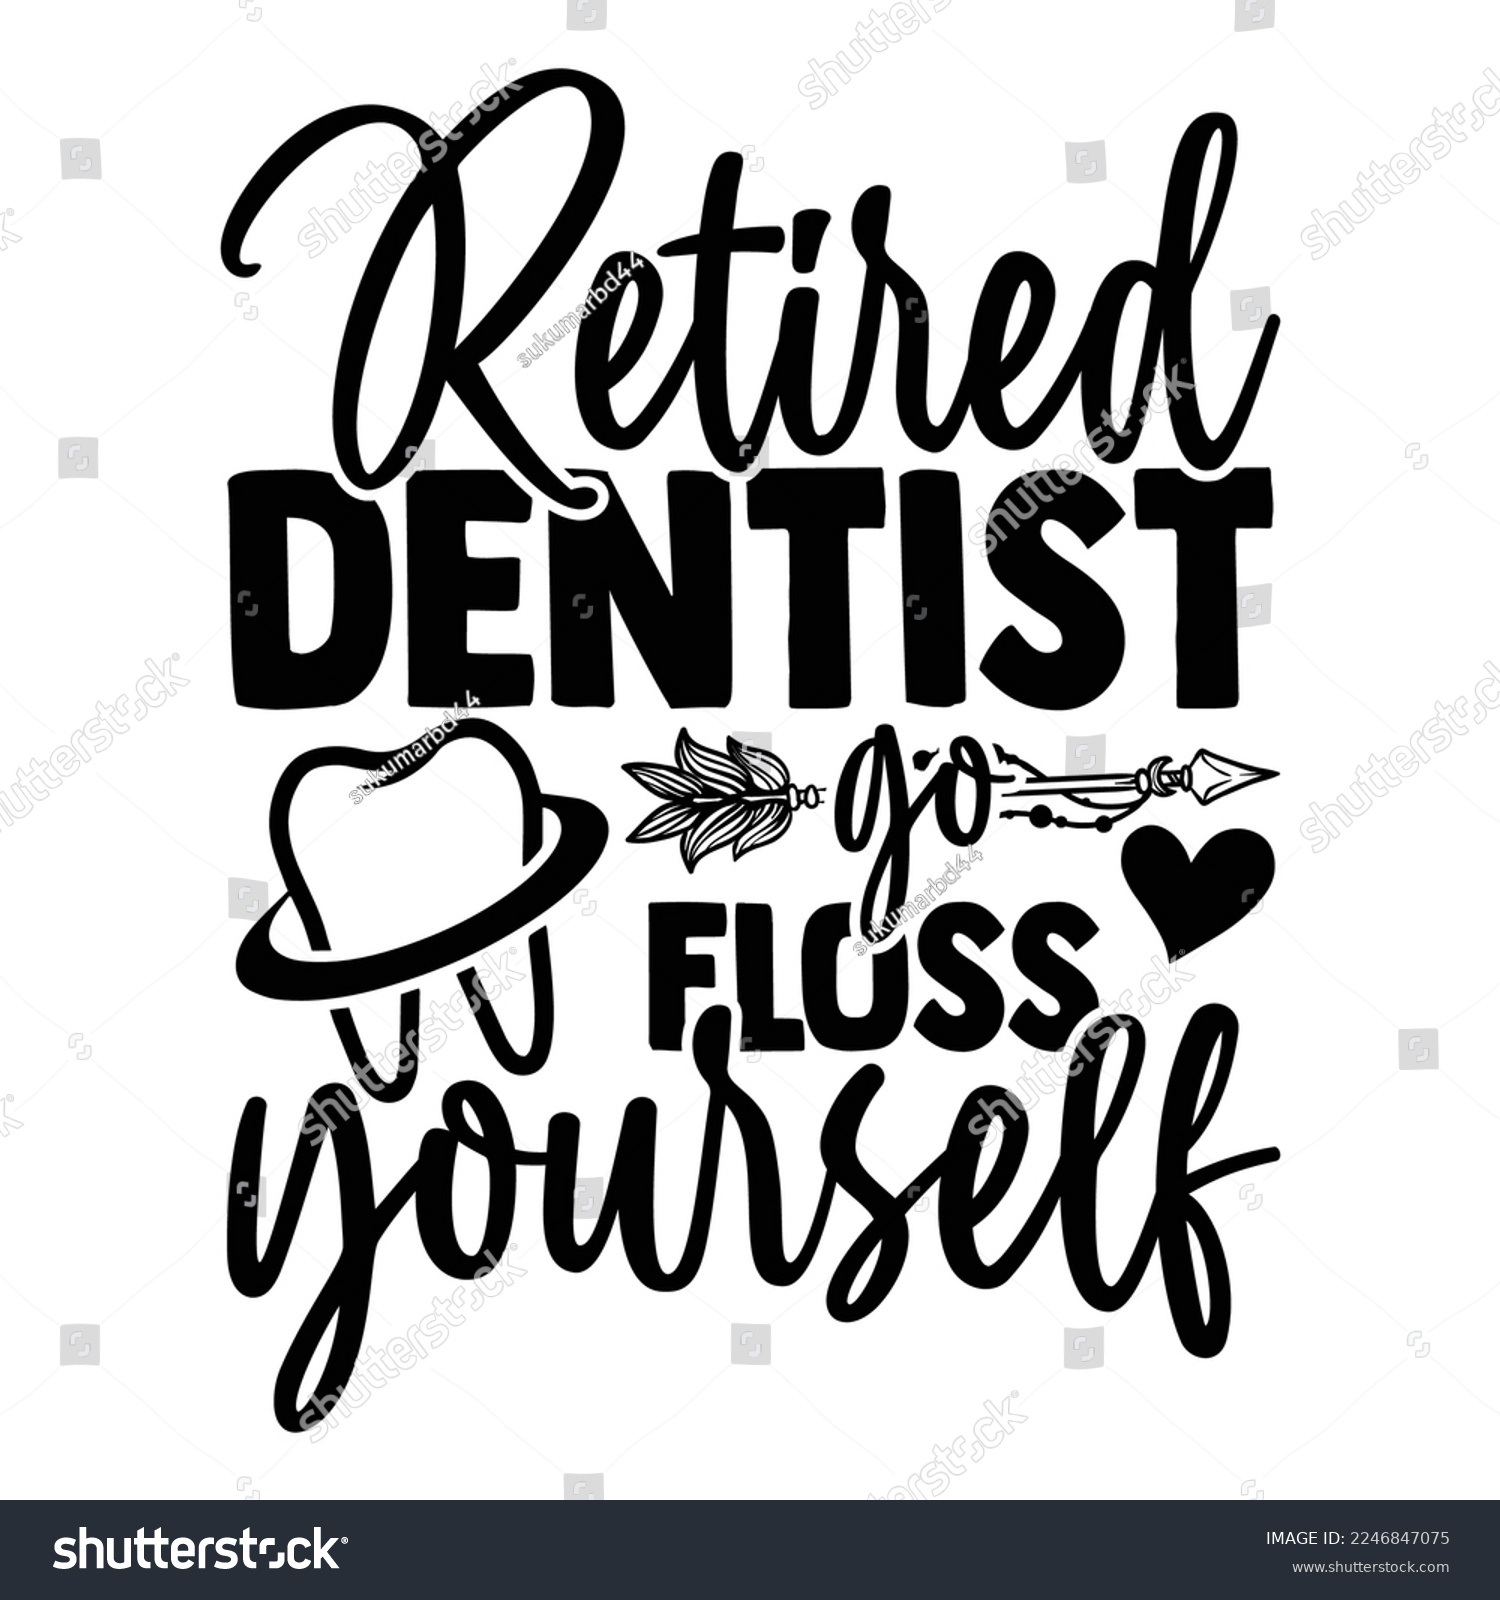 SVG of Retired Dentist Go Floss Yourself - Dentist T-shirt Design, Conceptual handwritten phrase svg calligraphic, Hand drawn lettering phrase isolated on white background, for Cutting Machine, Silhouette Ca svg